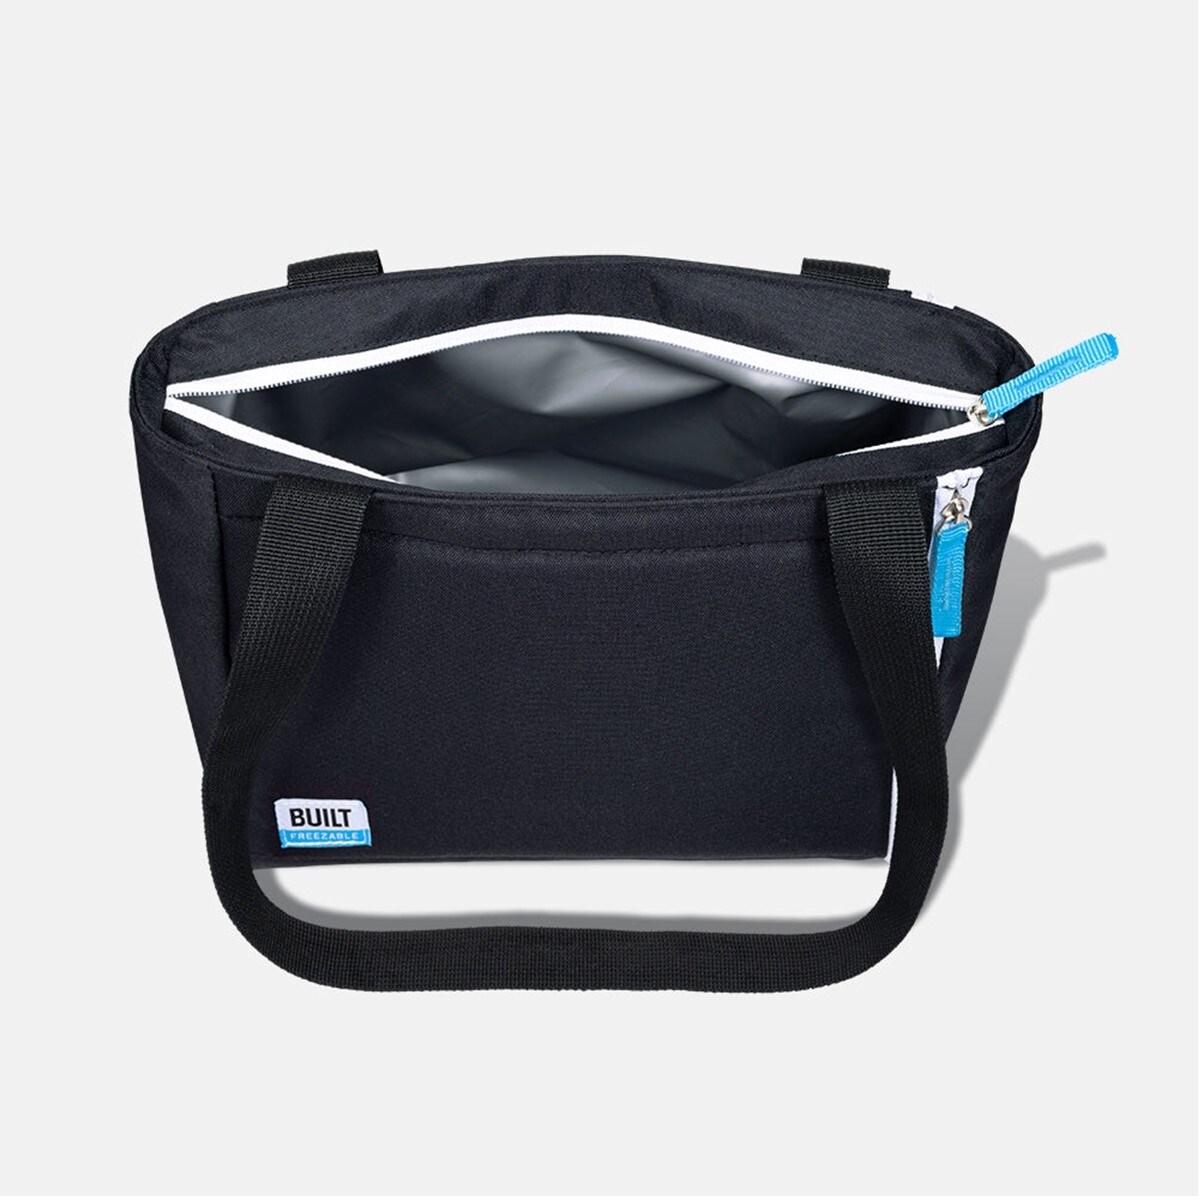 https://ak1.ostkcdn.com/images/products/is/images/direct/1537aaa47b4d2641dac238f794f657304c2f83a5/BUILT-IceHouse-Polyester-Frost-Lunch-Tote.jpg